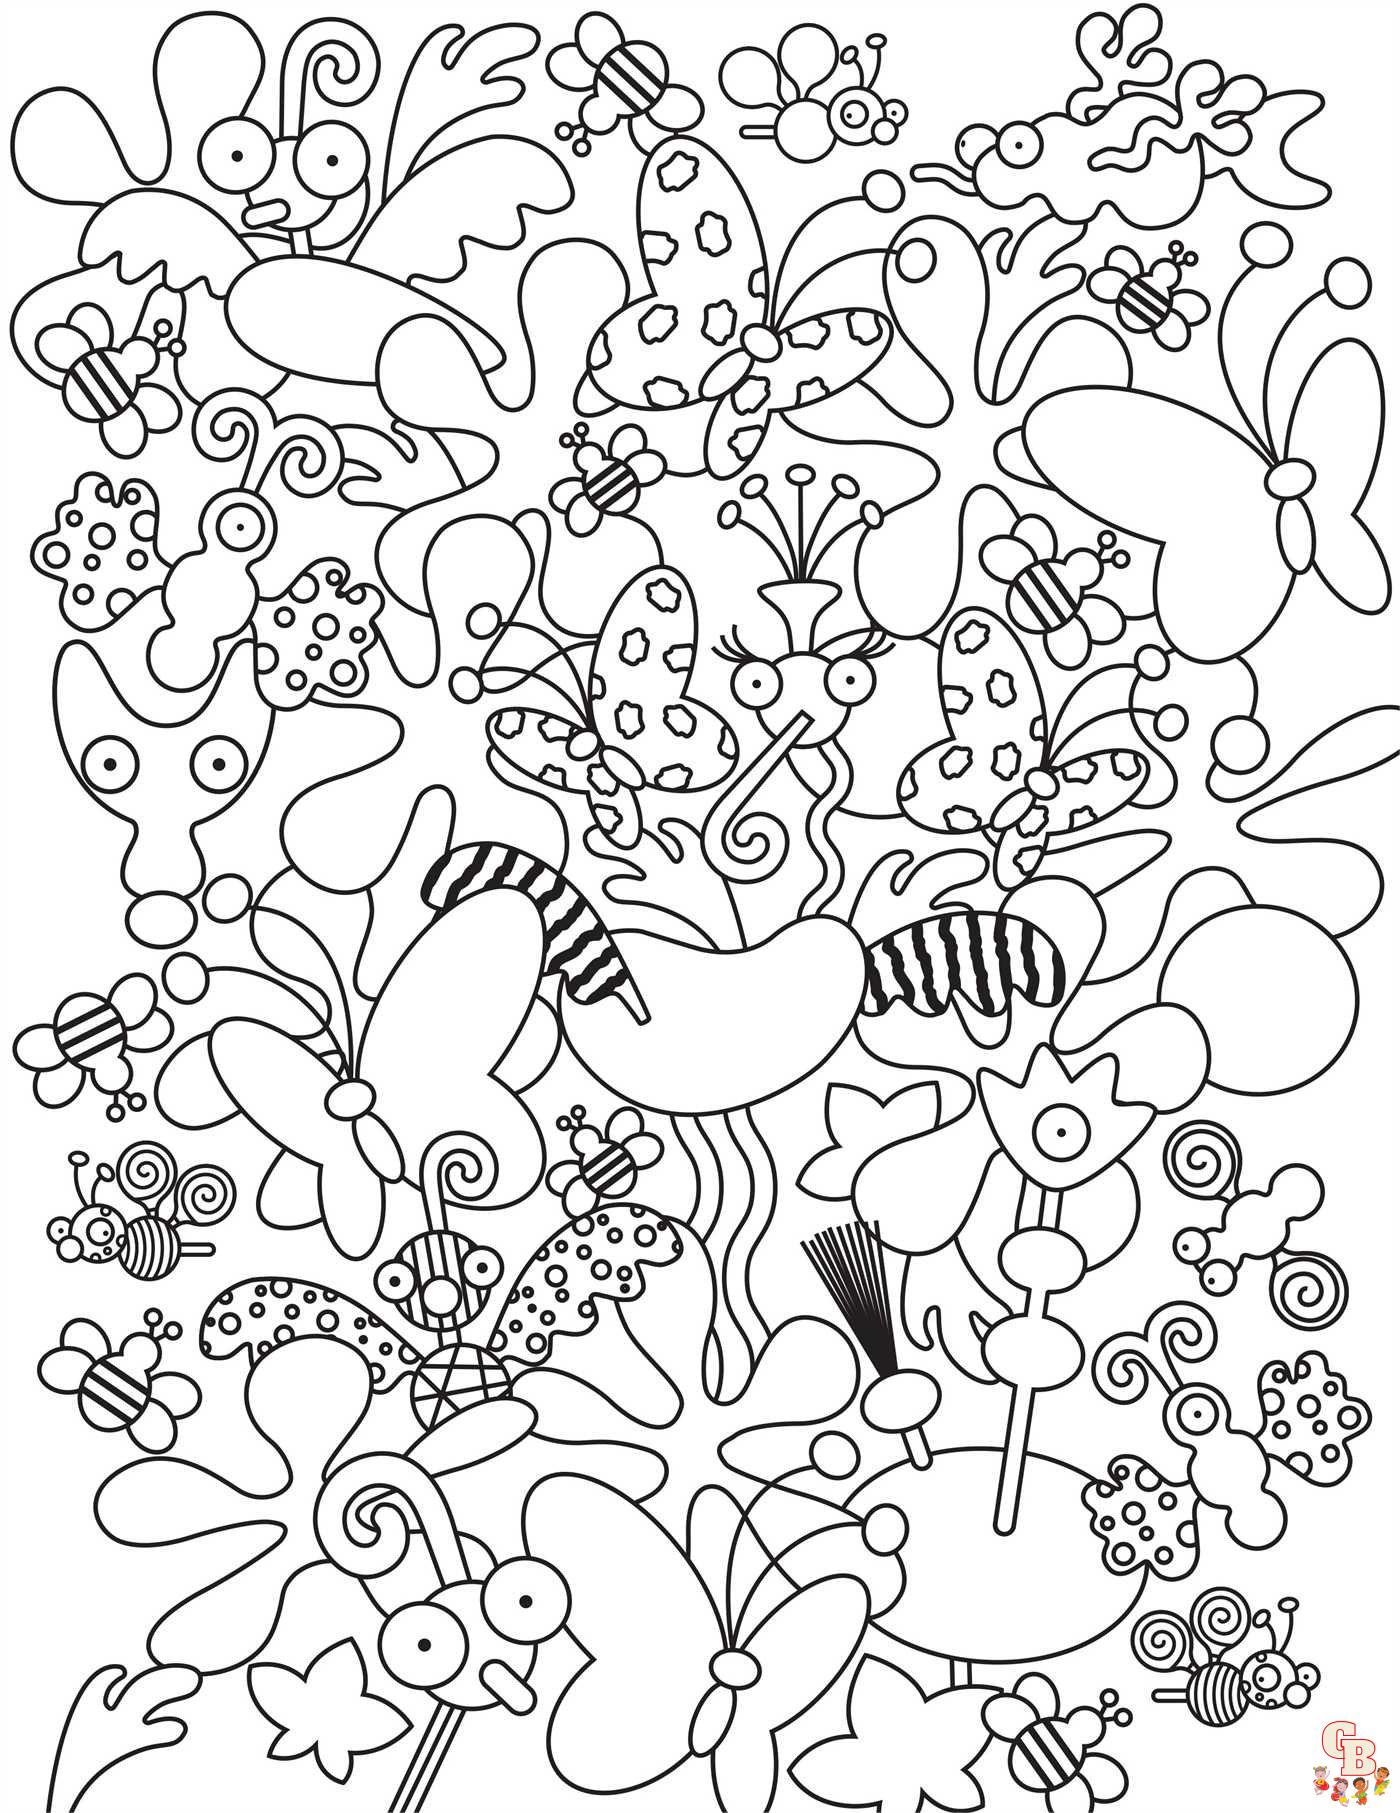 Cute Doodle Coloring Pages 11